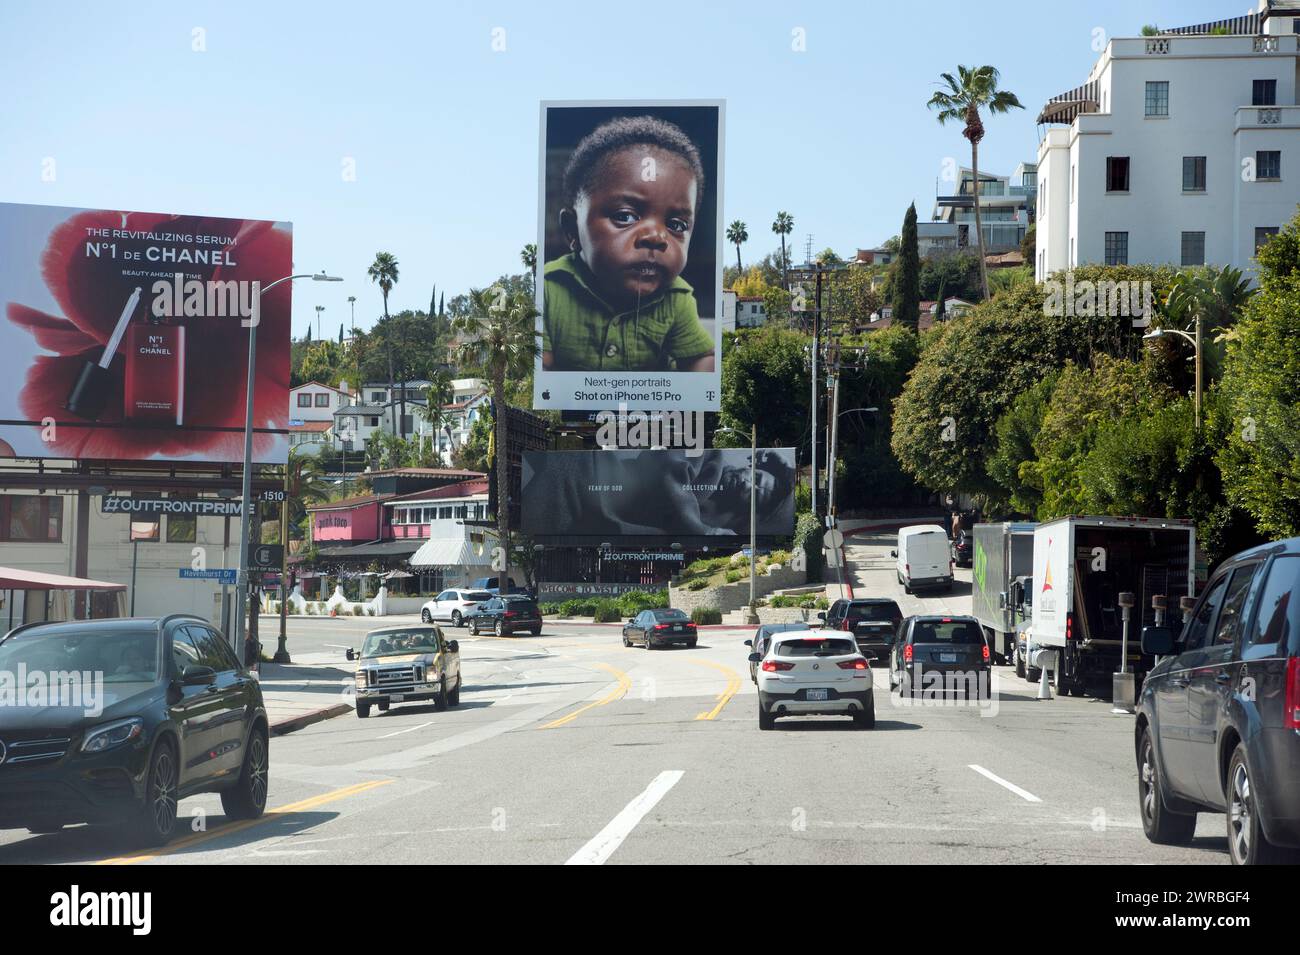 Billboards on the Sunset Strip, including IPhone advertisement, Los Angeles, California, USA Stock Photo